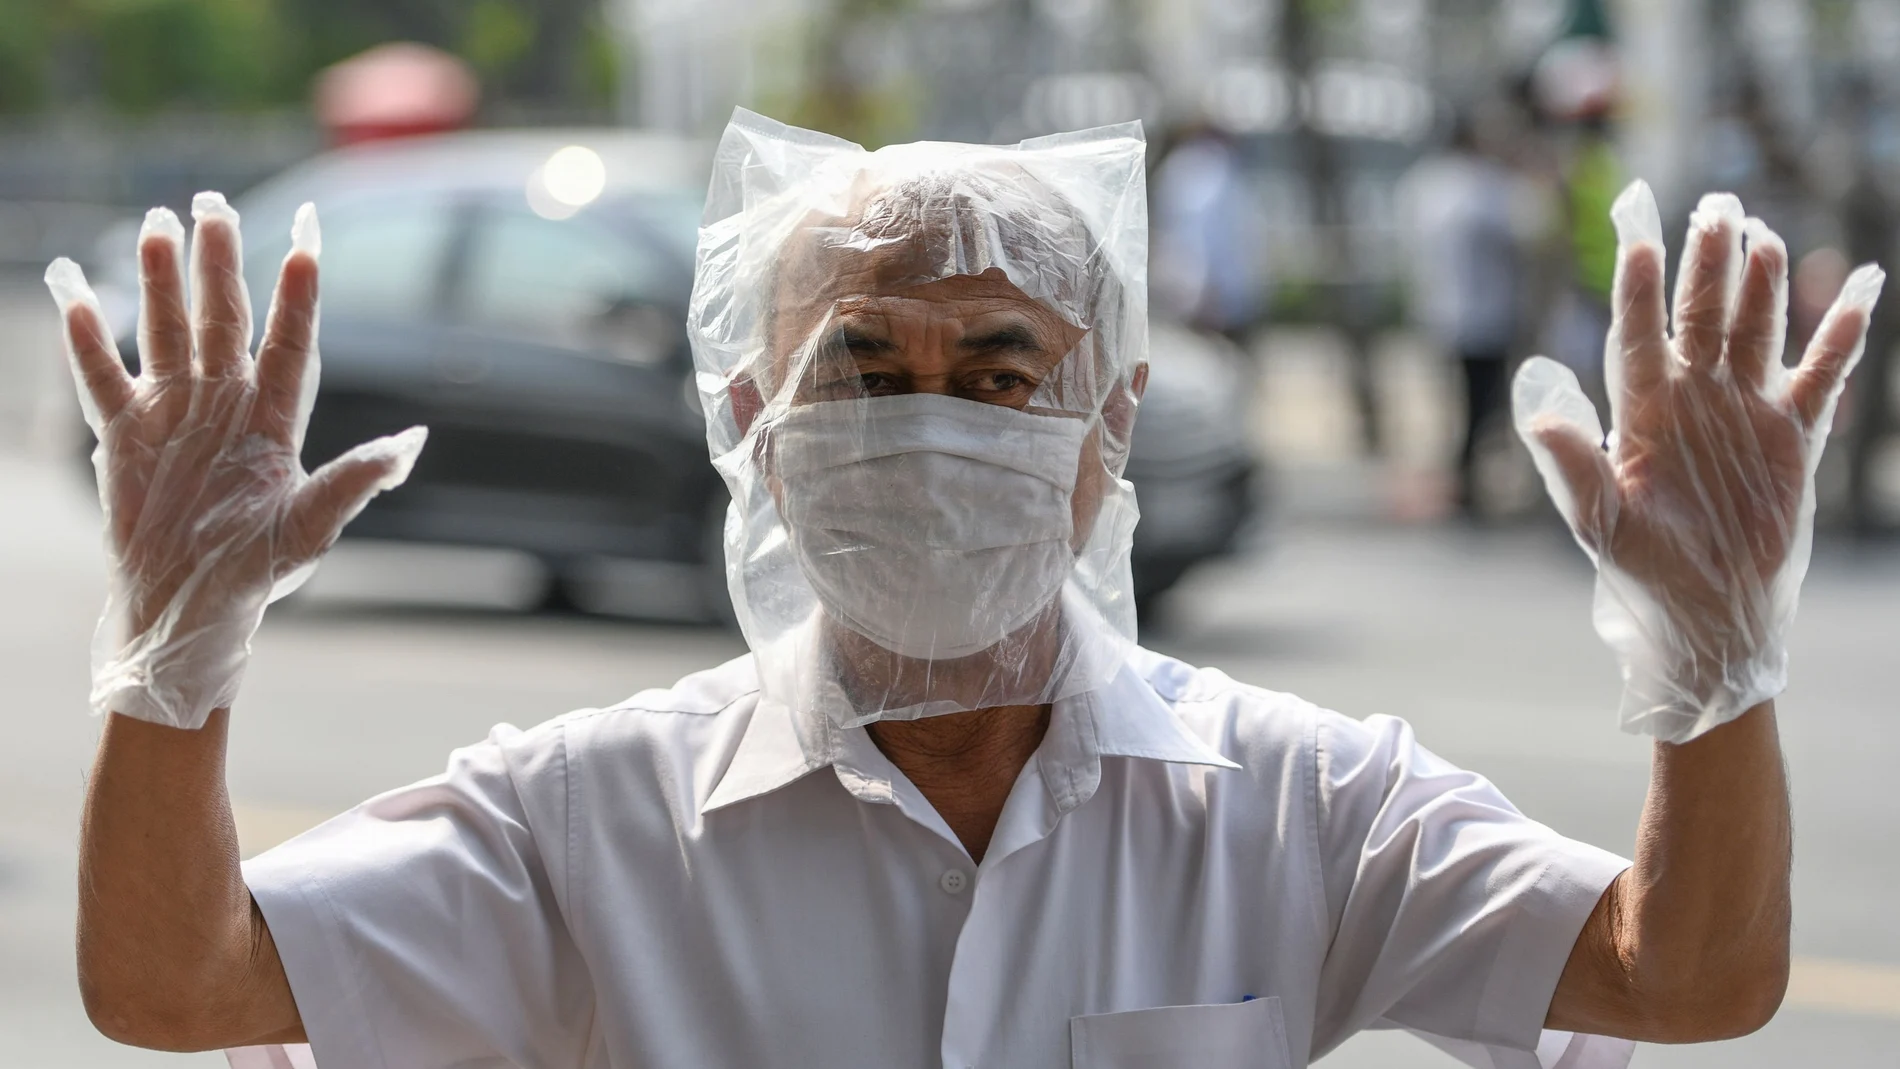 A man wearing a plastic bag as precaution against the coronavirus disease (COVID-19), takes part in protests demanding to reduce the Royal budget and distribute it to people, in front of the government house in Bangkok, Thailand January 26, 2021. REUTERS/Challinee Thirasupa